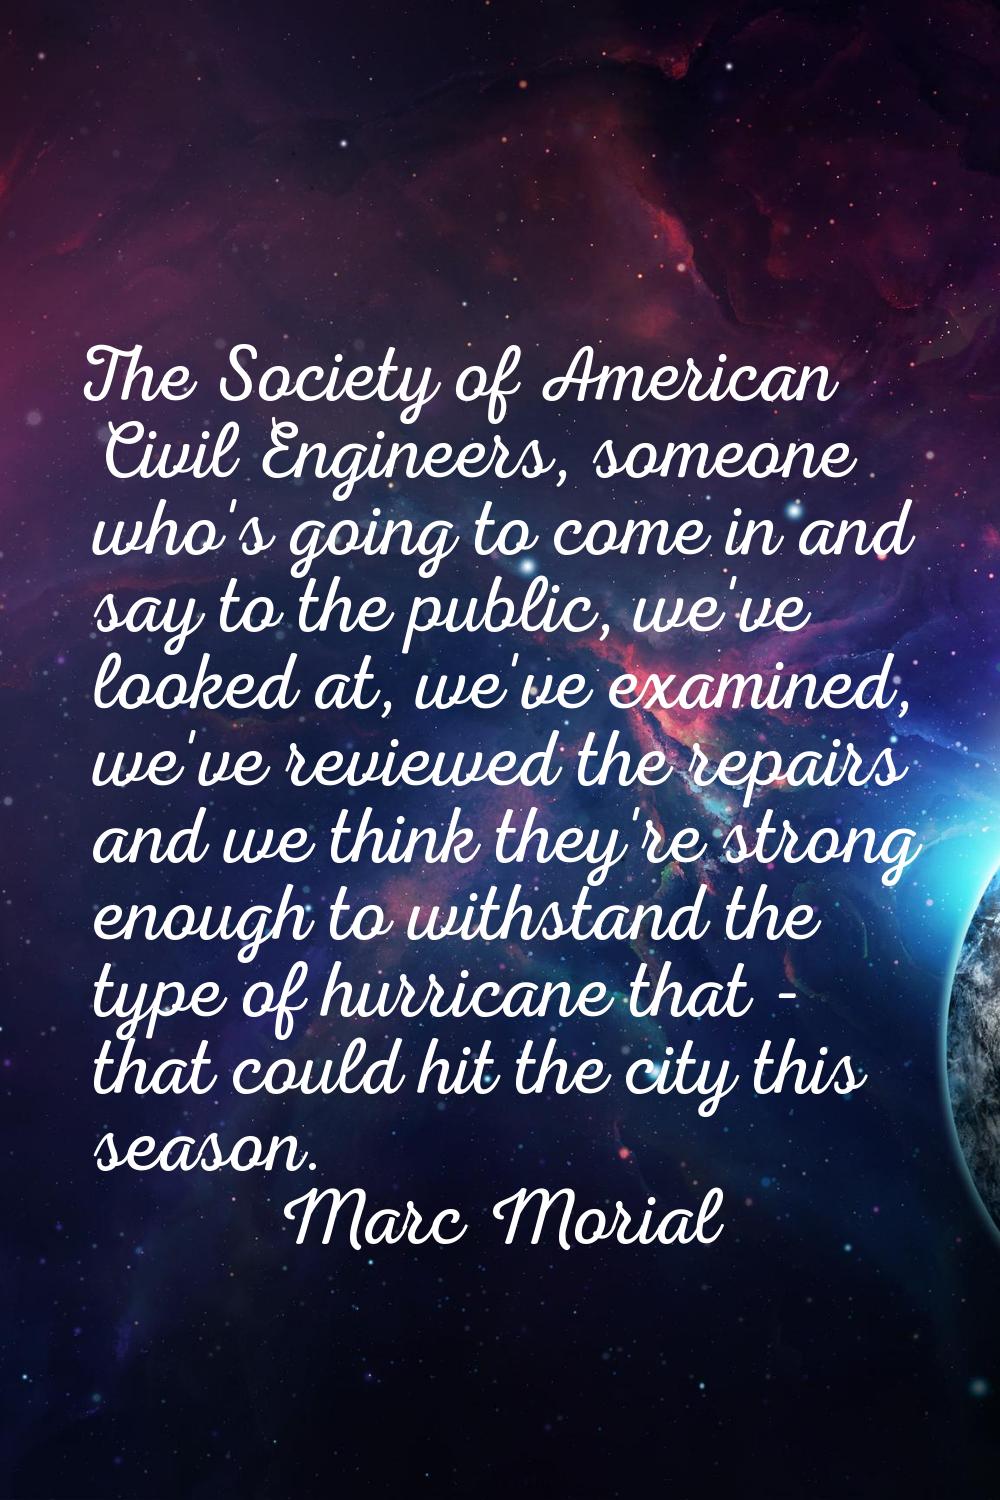 The Society of American Civil Engineers, someone who's going to come in and say to the public, we'v